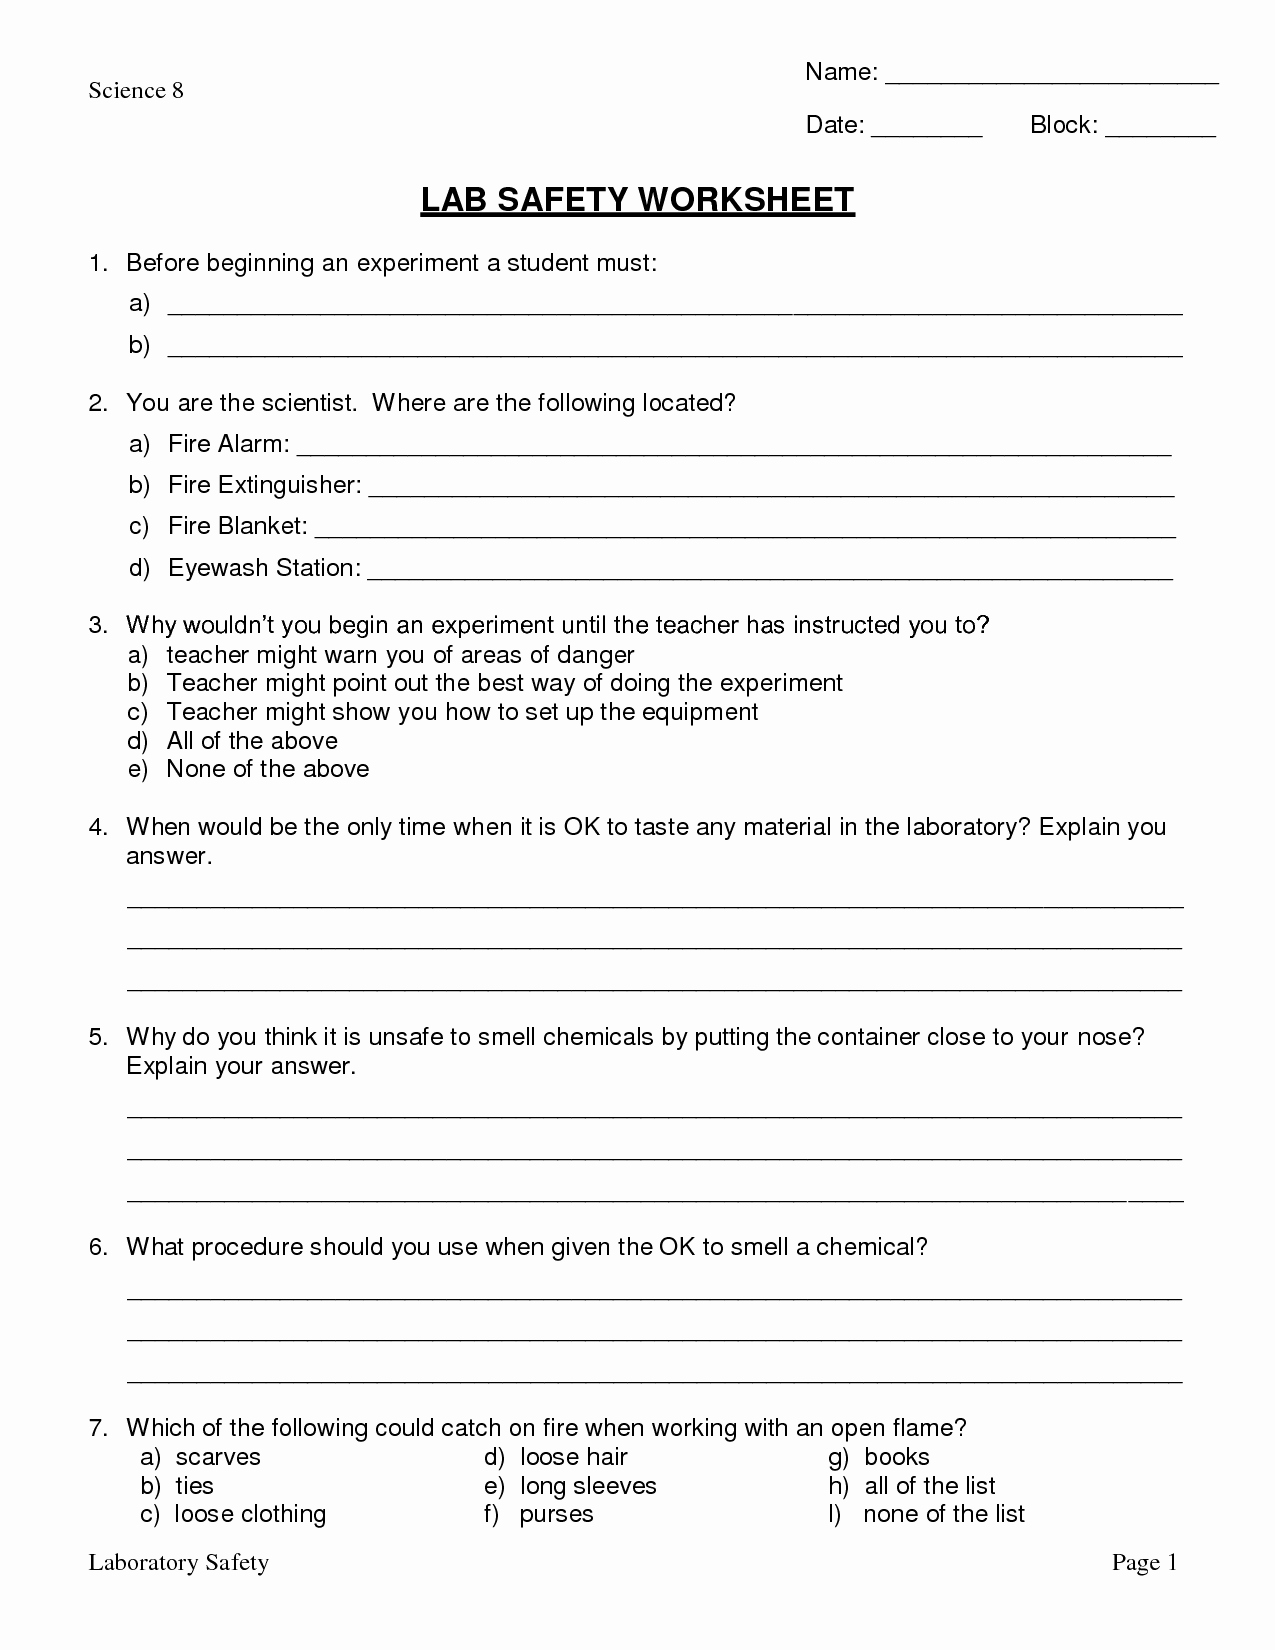 Chemistry Lab Equipment Worksheet Awesome Pin by Zaiba Ali On Classroom